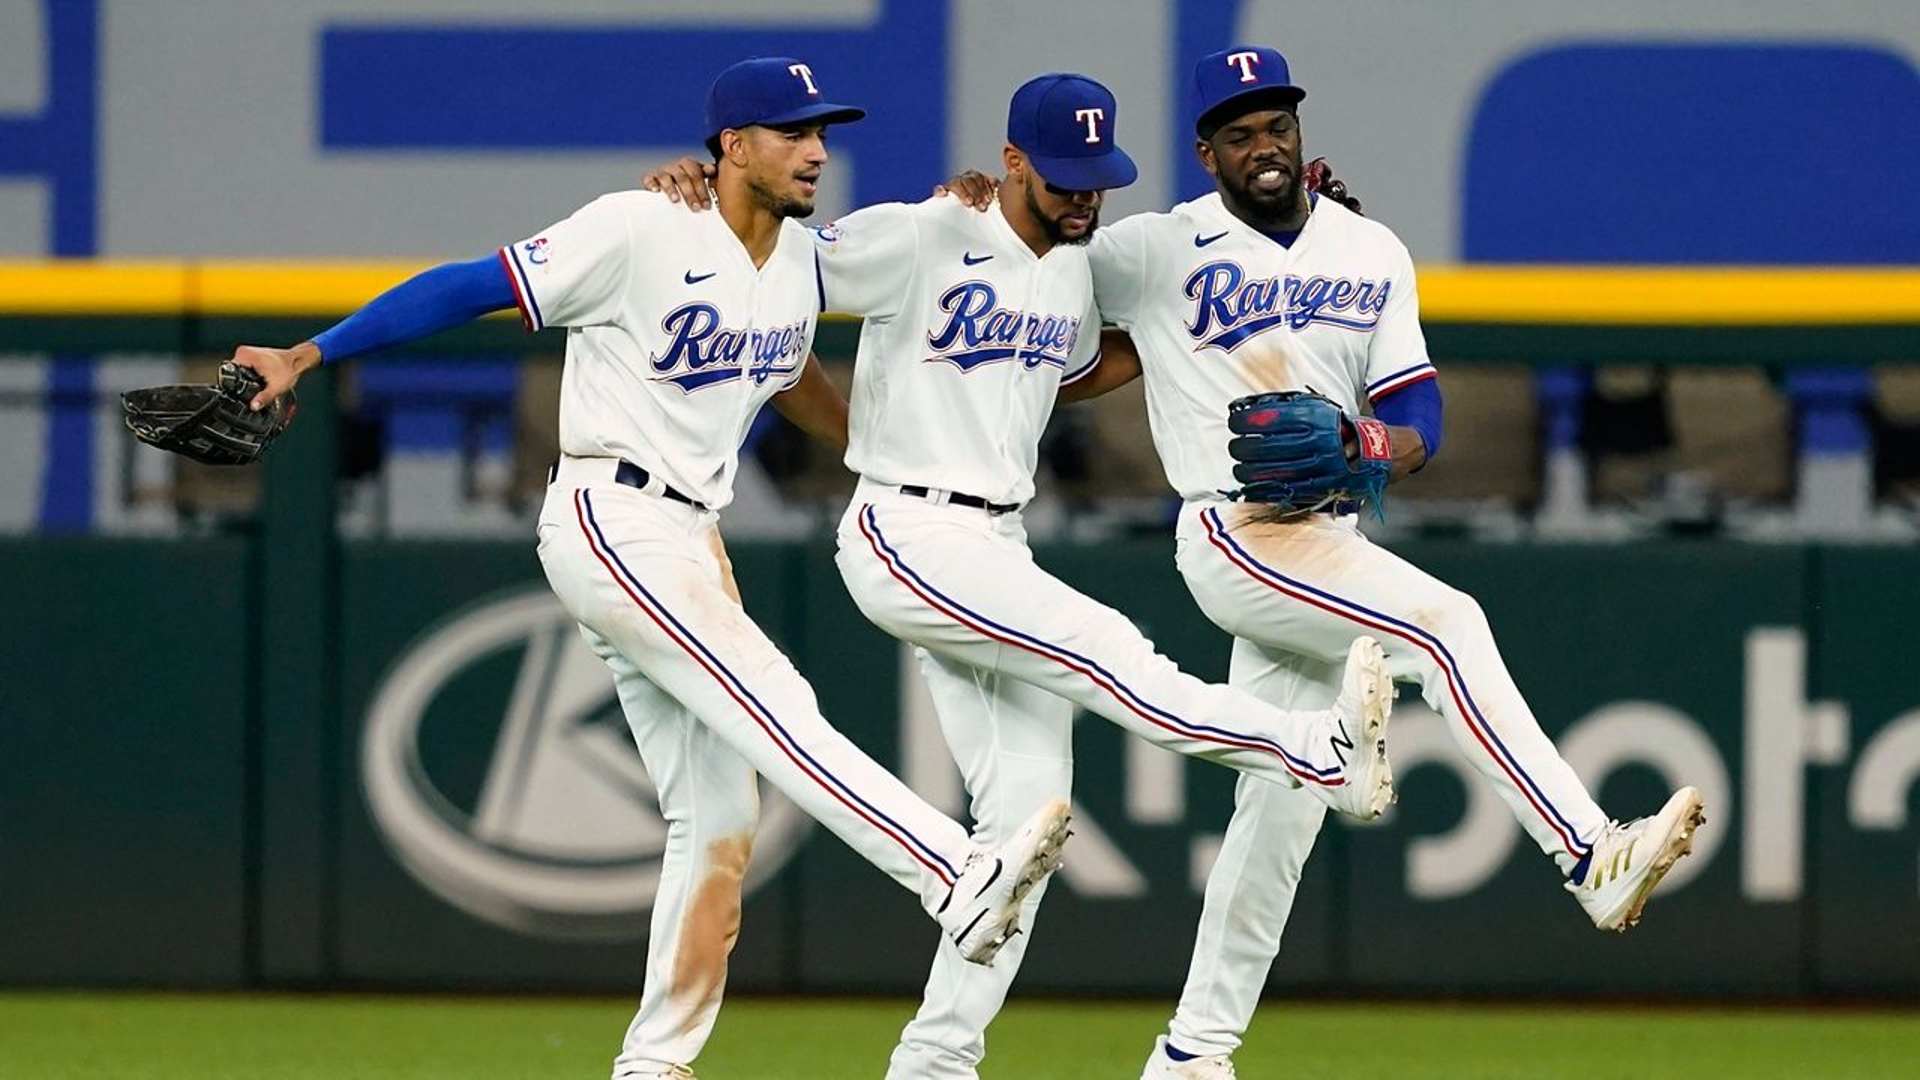 The match Texas Rangers vs Toronto Blue Jays will take place at Globe Life Field in Texas on September 11 at 2:35 PM ET.